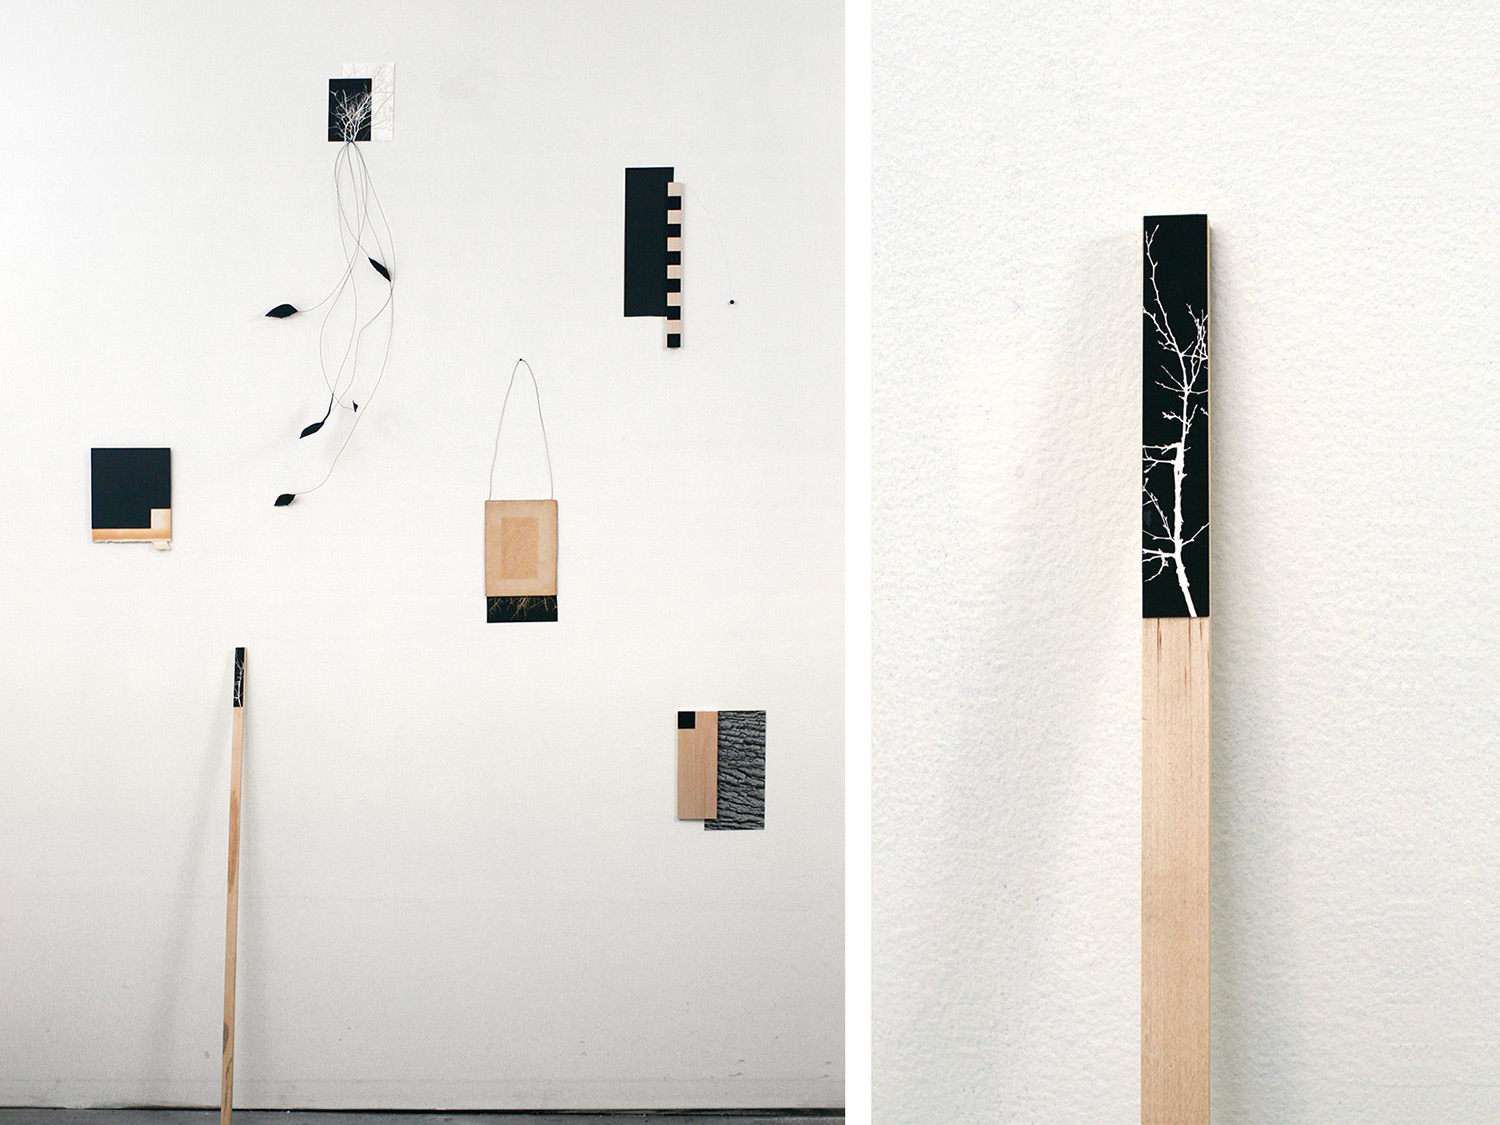 Coder’s Garden with Yardstick (detail). Flashe, gouache, archival pigment prints, paper, wood, wire. 2014.